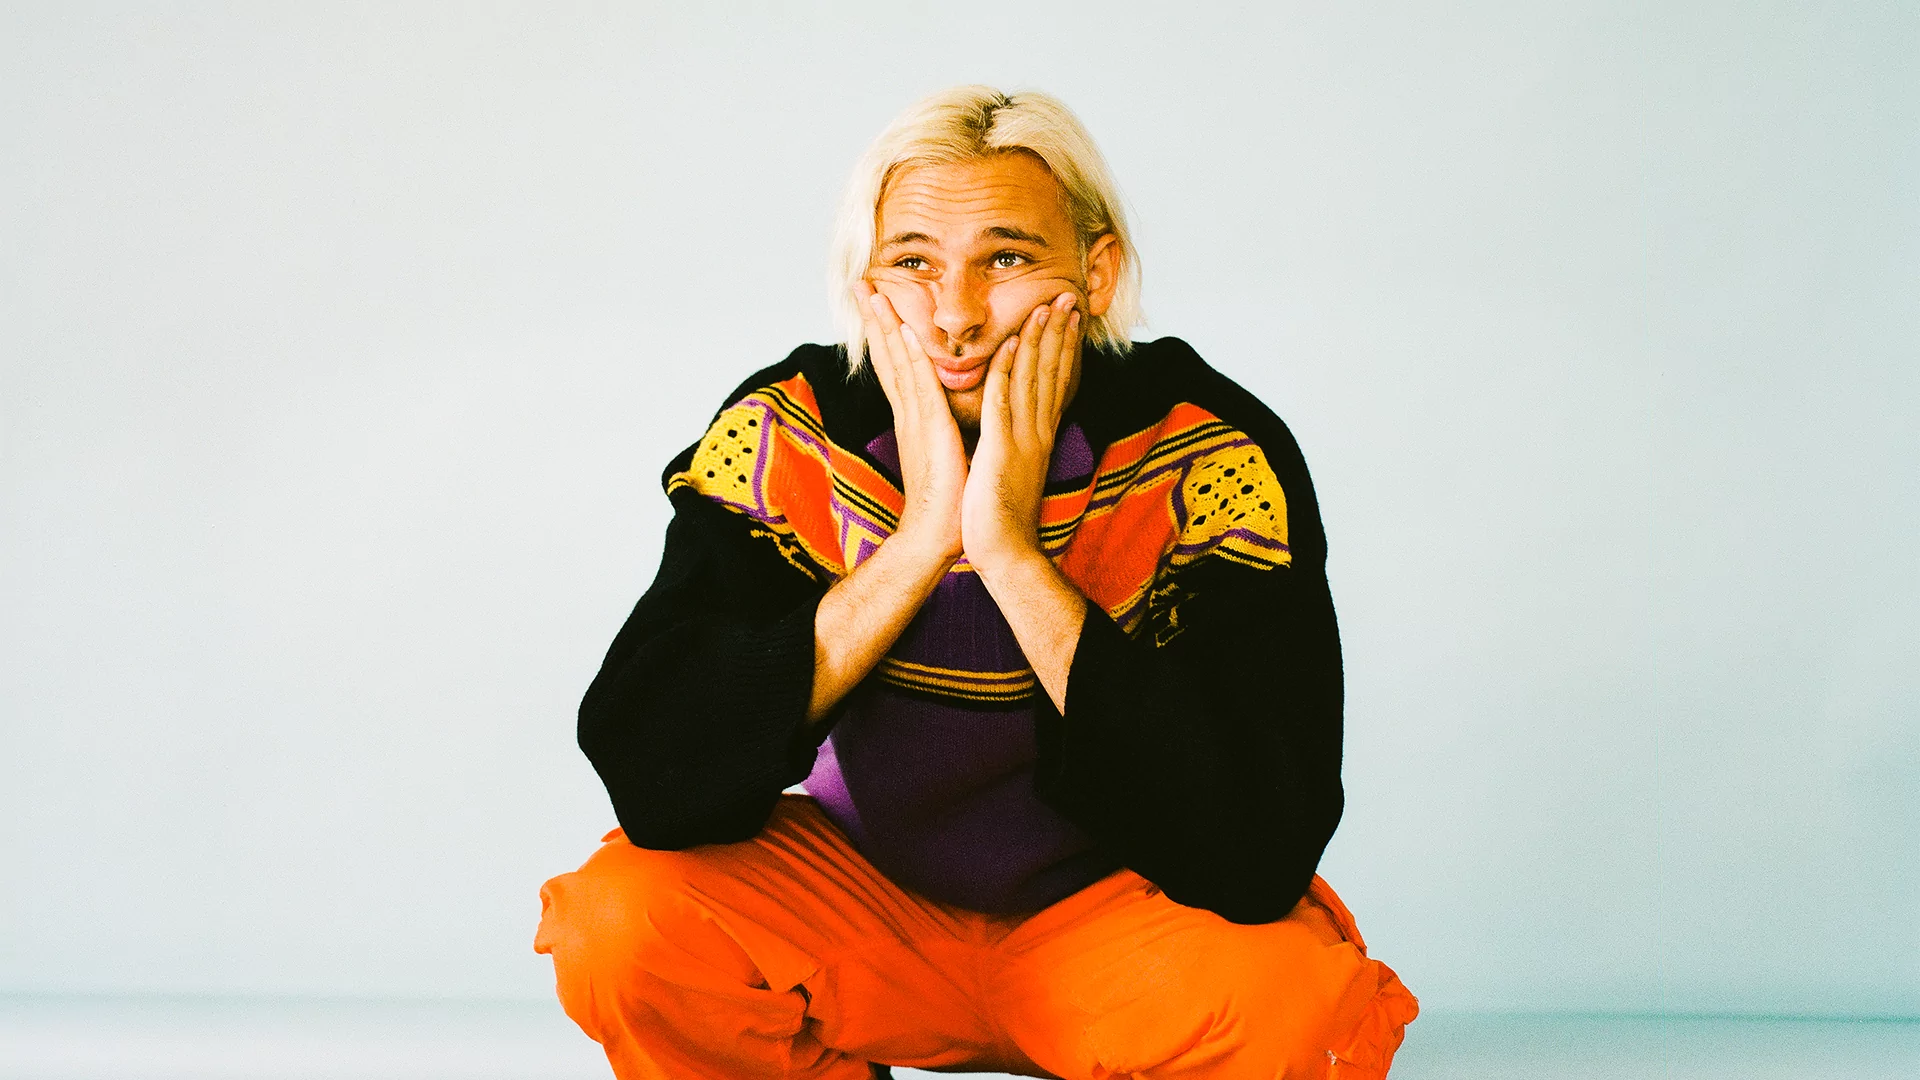 Flume resting his chin on his hands, in orange trousers and an orange and black jacket against a neutral background